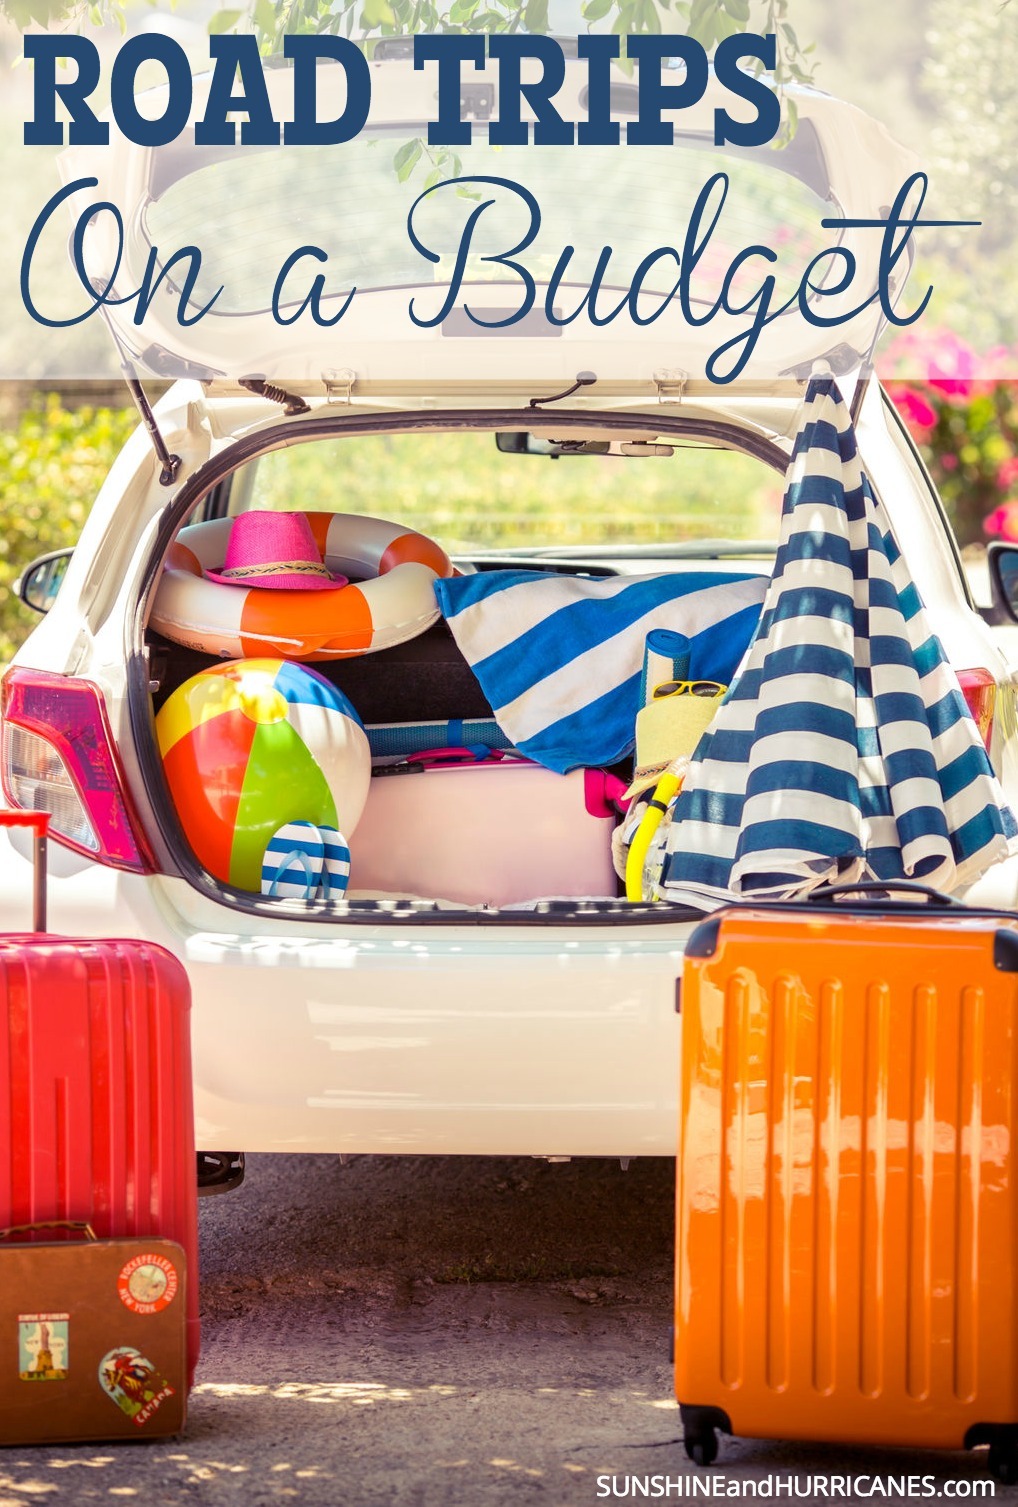 Want to hit the open road with your family for fun and adventure? Afraid that it might break the budget? There are plenty of ways to keep costs under control and still enjoy a road trip vacation. Here will show you plenty of ways to save for an affordable family trip that everyone will love! Road Trips on a Budget. SunshineandHurricanes.com